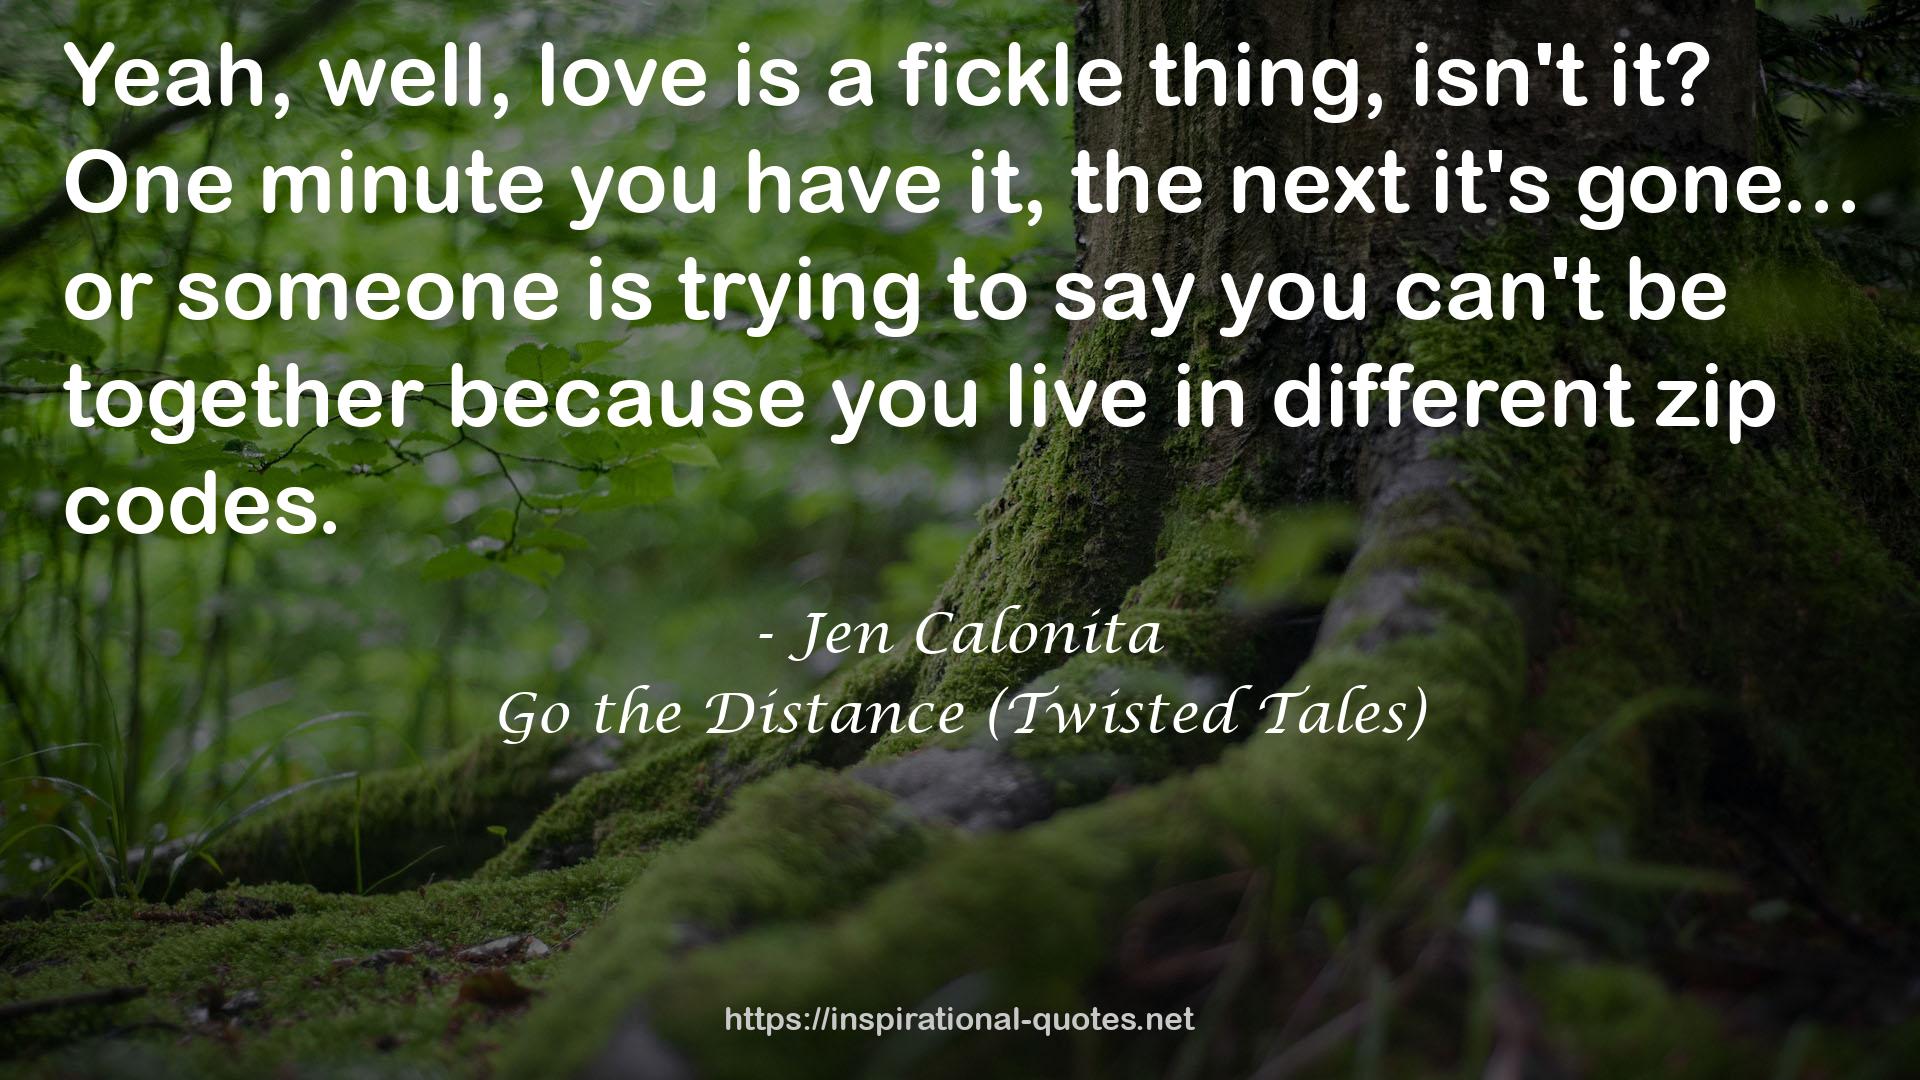 Go the Distance (Twisted Tales) QUOTES